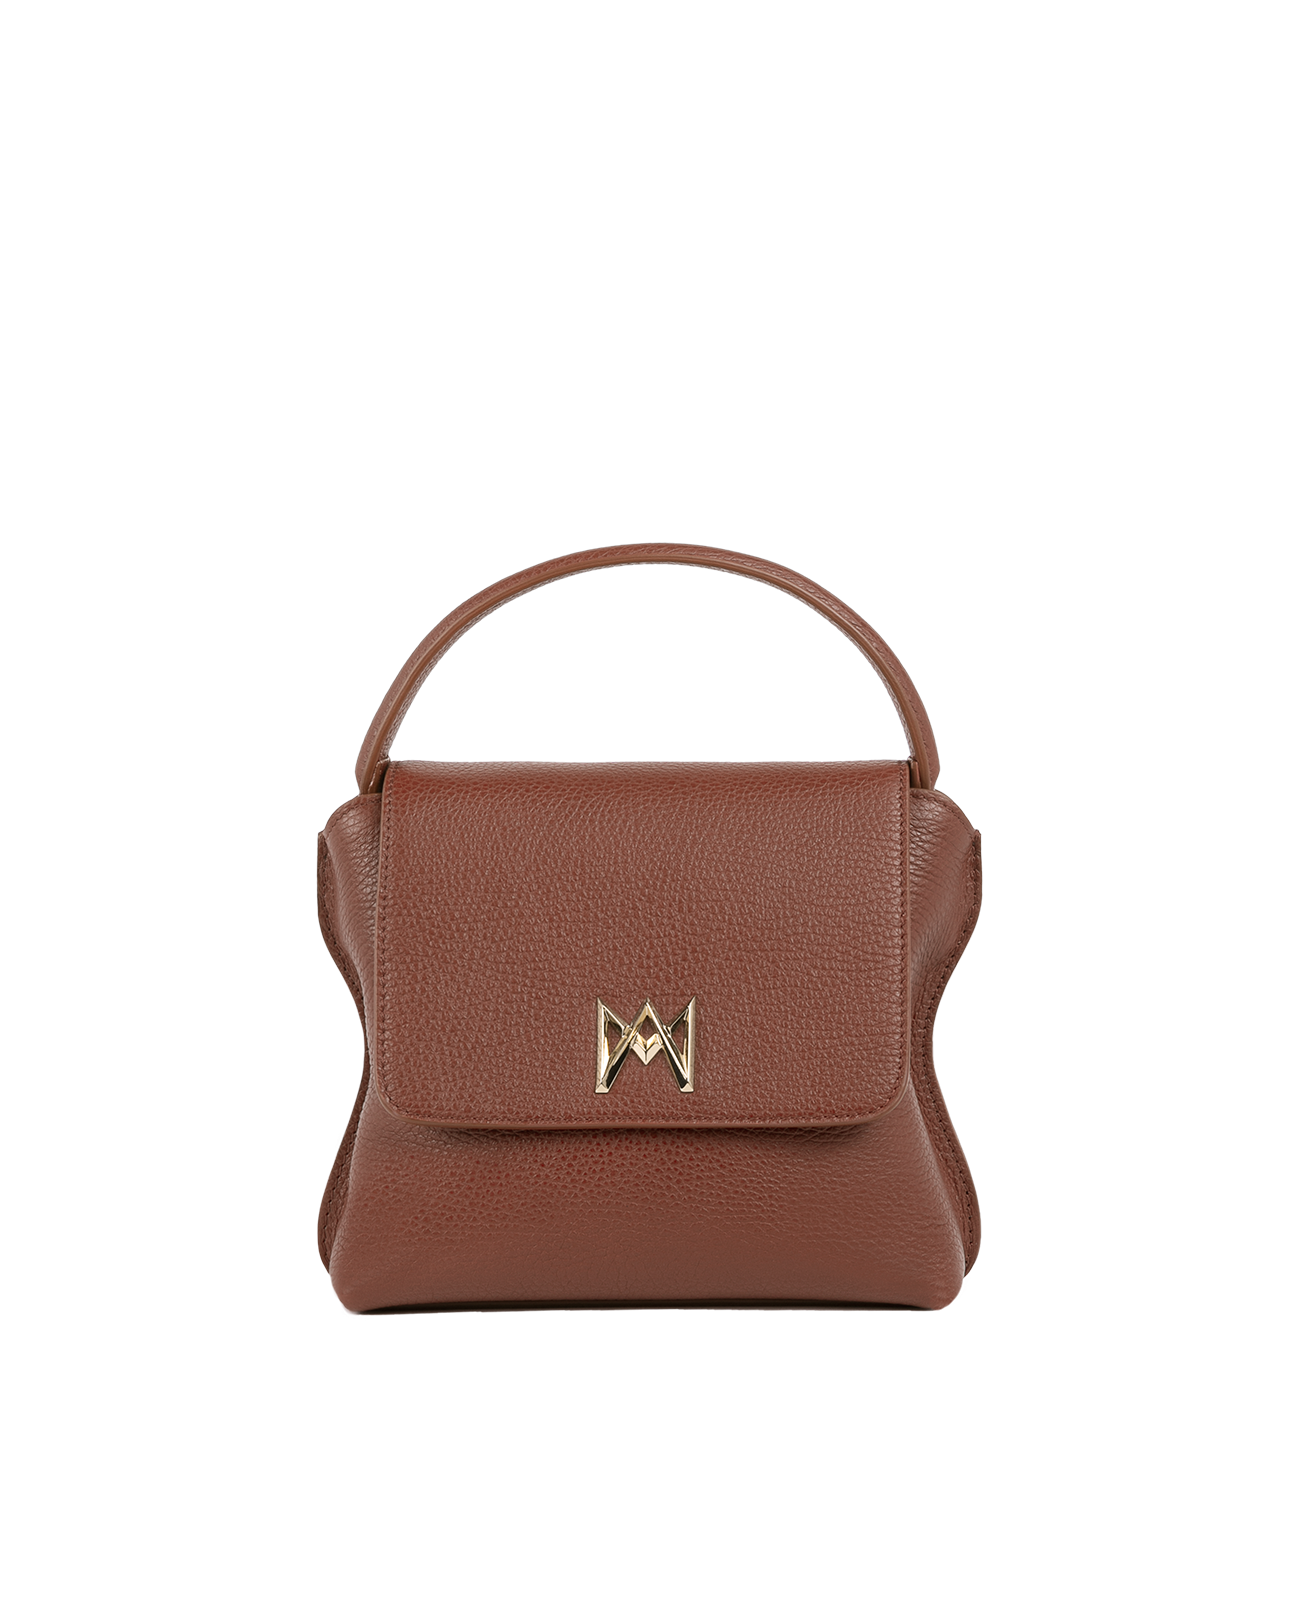 Cross-body bag in Italian full-grain leather, semi-aniline calf Italian leather with detachable shoulder strap.Three compartments, zip pocket in the back compartment. Magnetic flap closure with logo. Color: Dark Brown. Size: Medium.